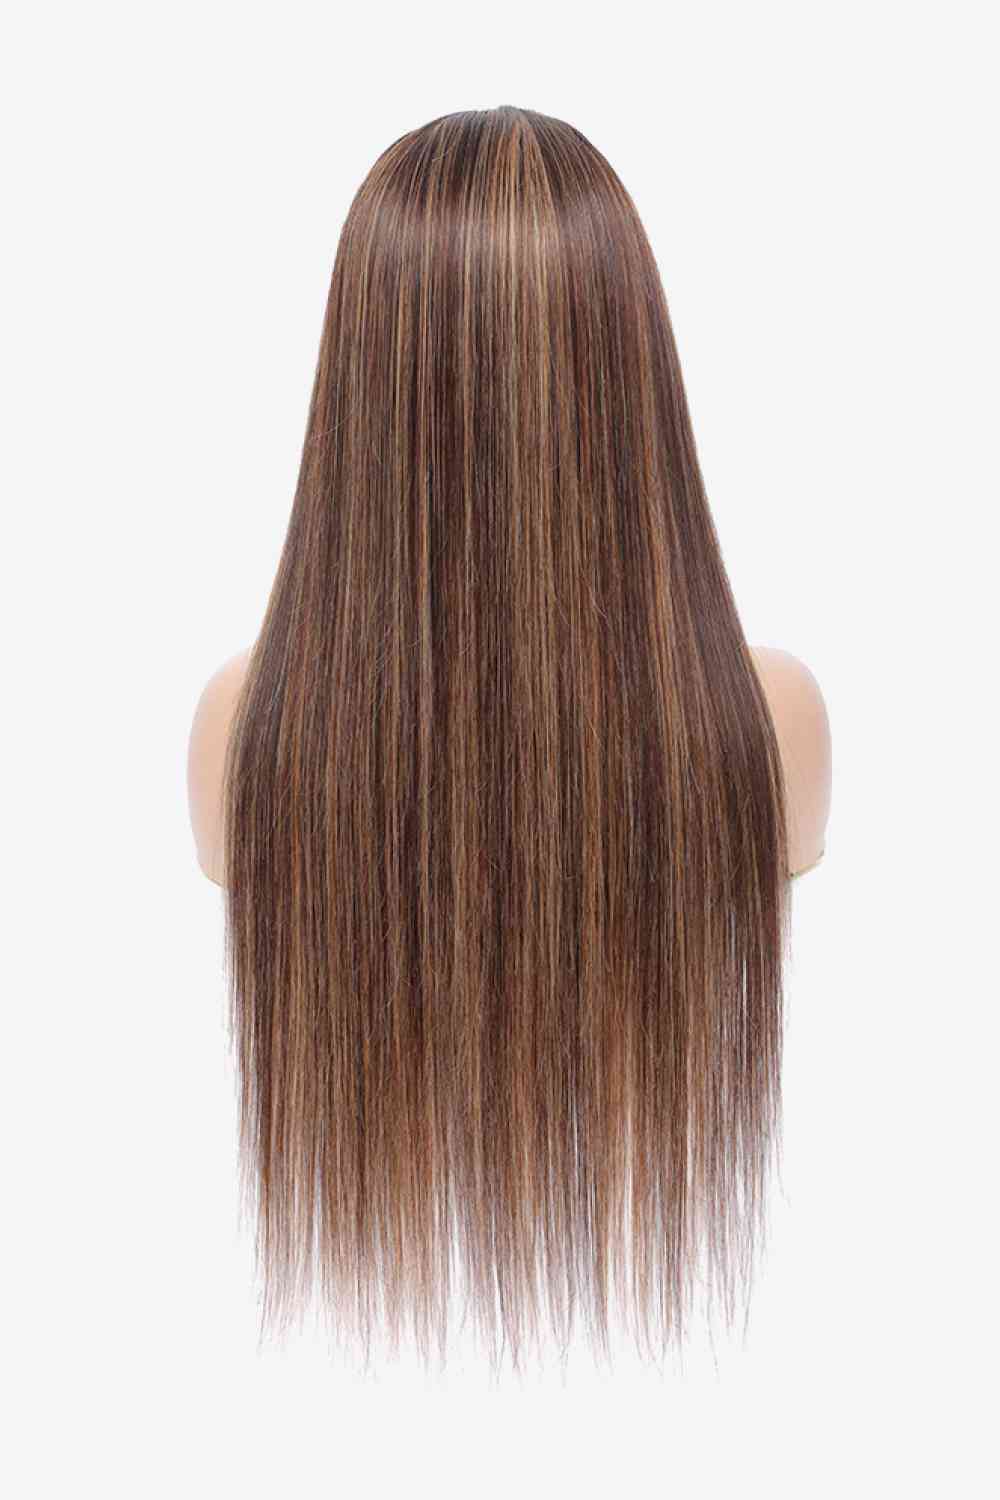 18" 160g  Highlight Ombre #P4/27 13x4 Lace Front Wigs Human Virgin Hair 150% Density Brown/Blonde Highlights One Size 